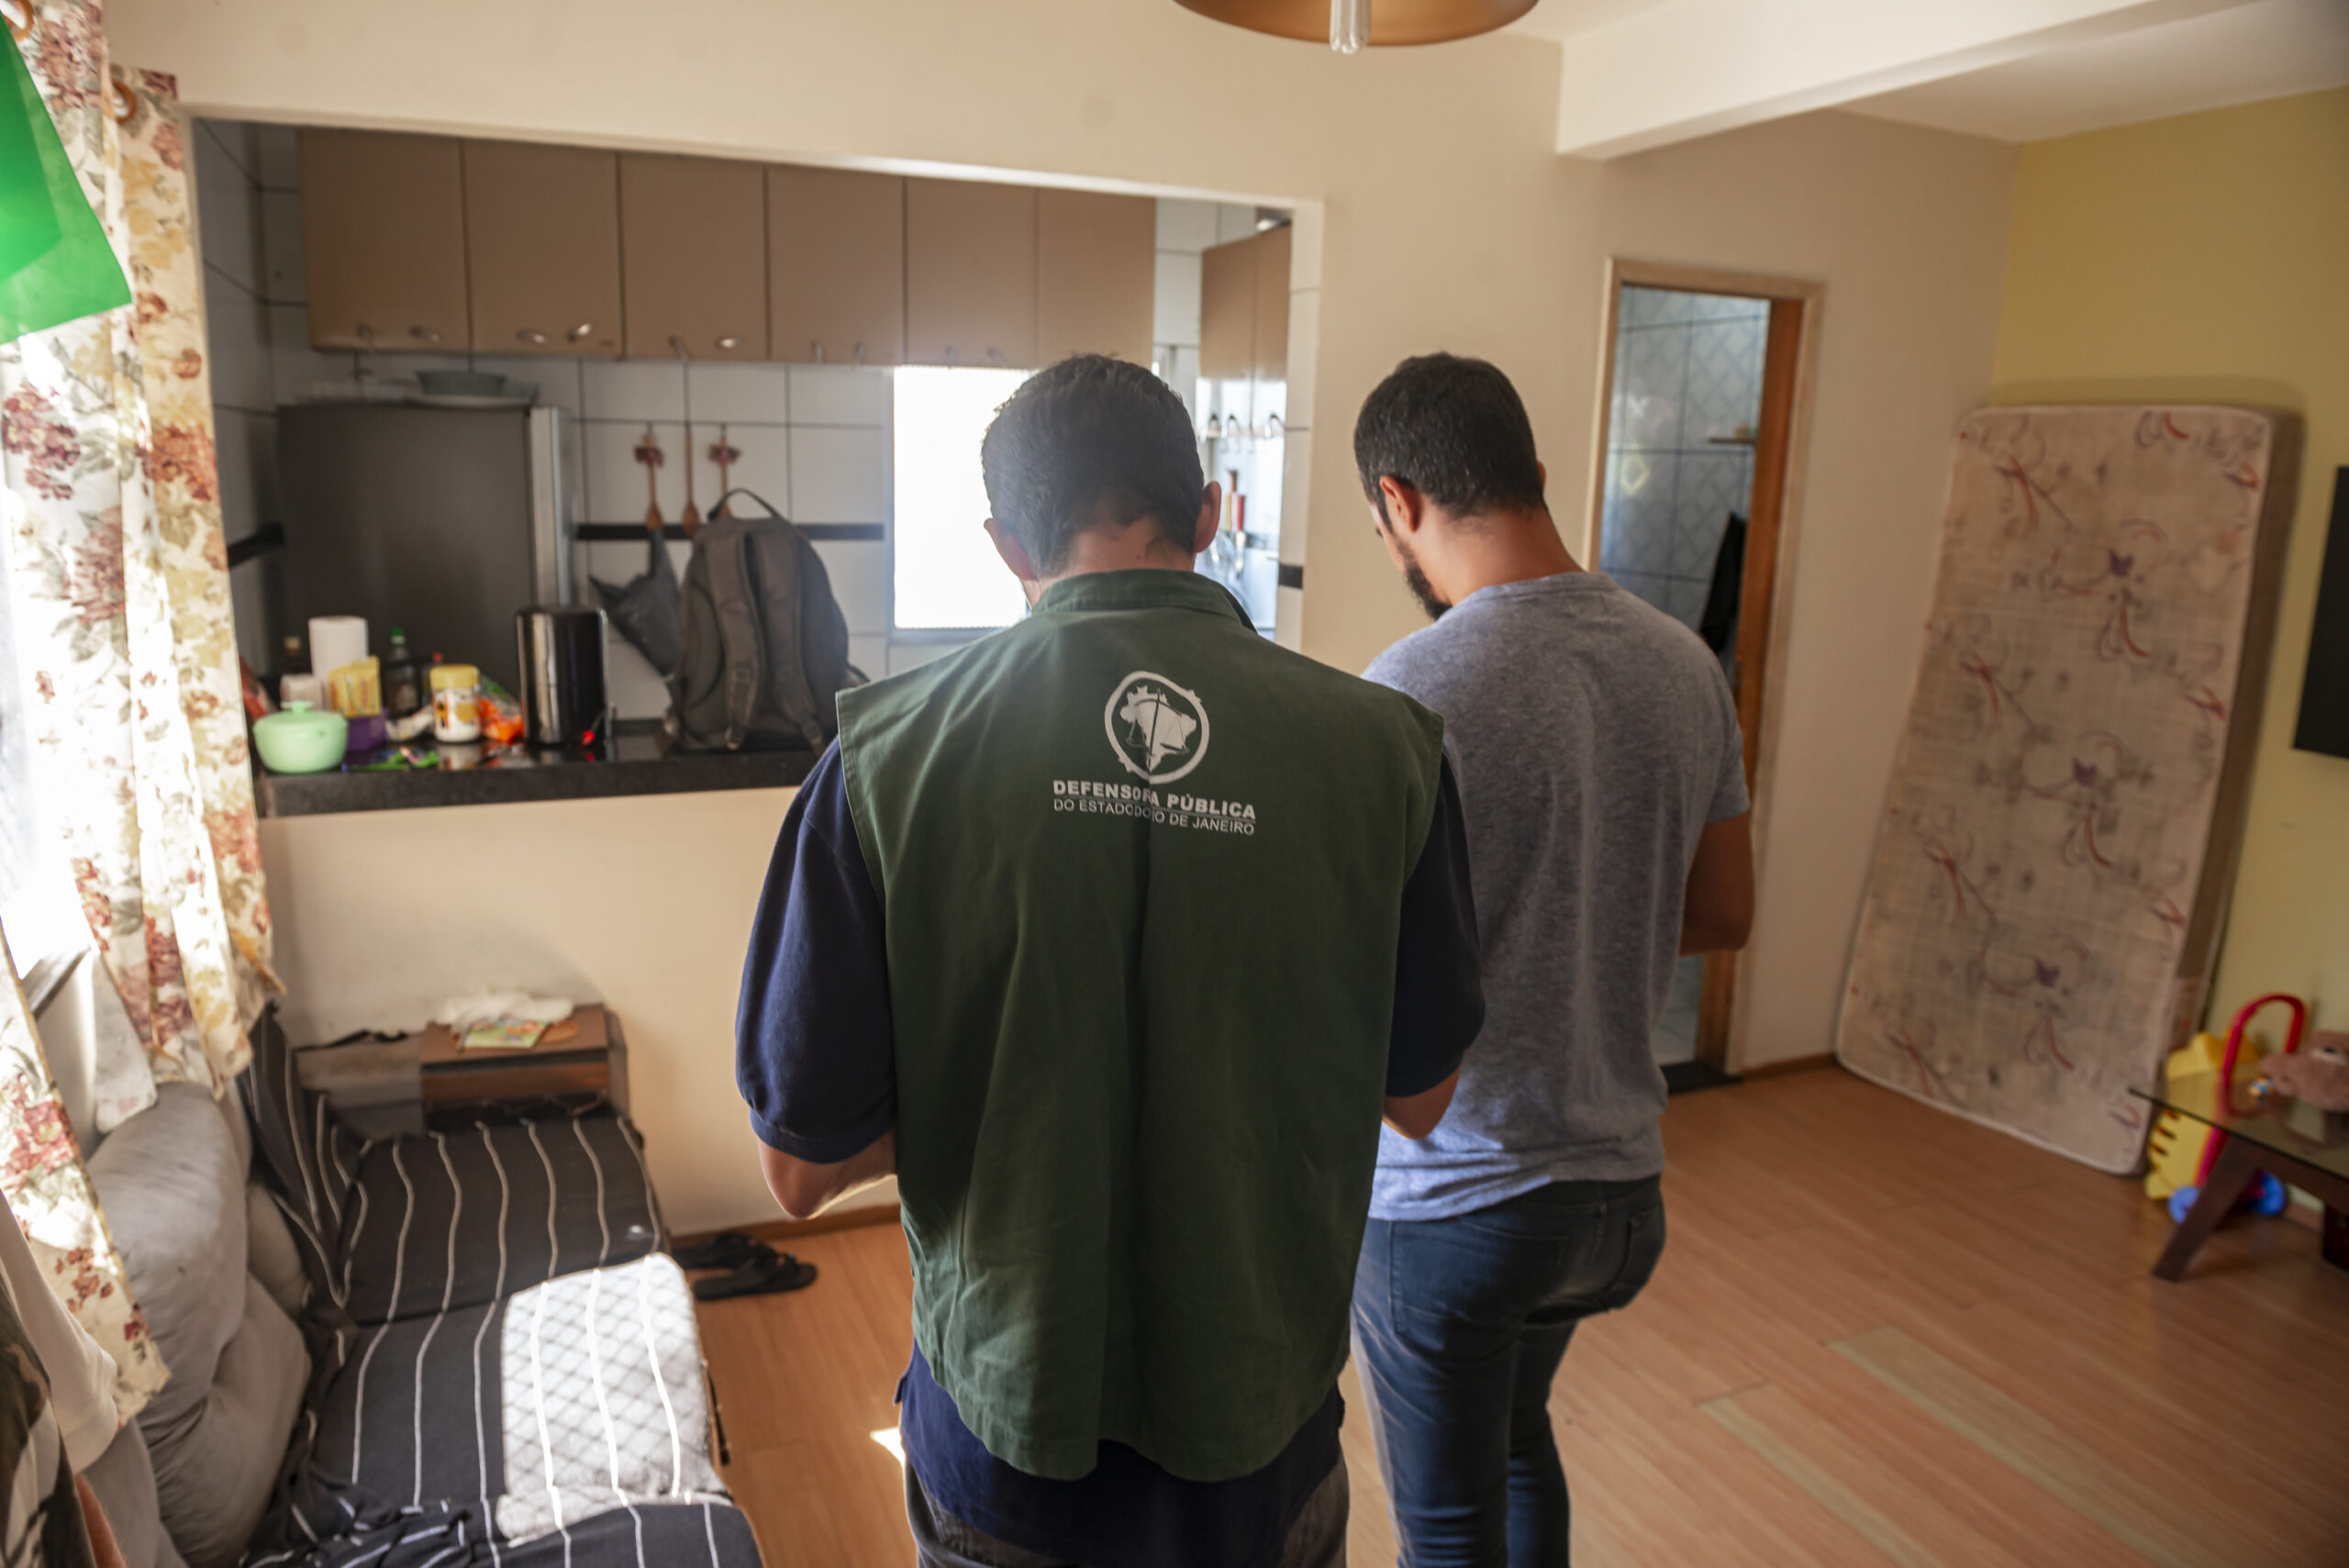 NUTH technical team inspects and measures homes in Jaqueira. Photo: Igor Albuquerque